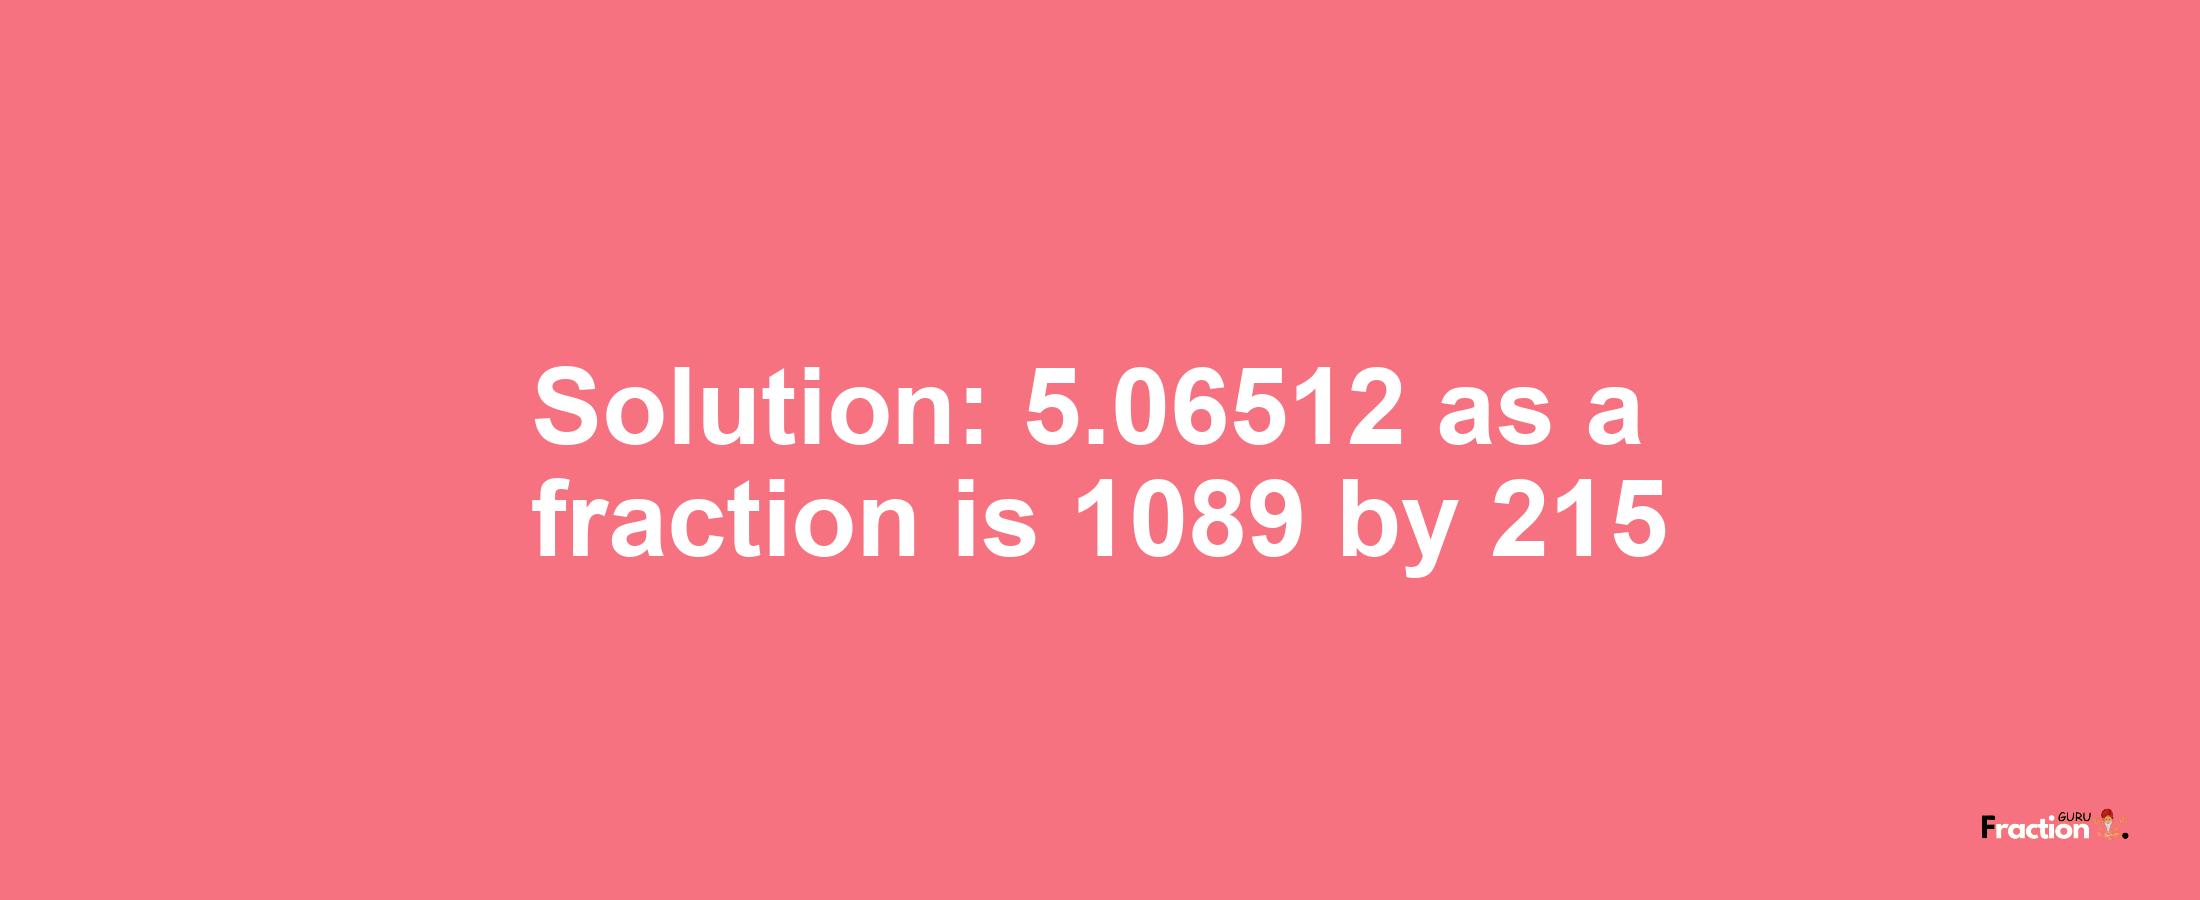 Solution:5.06512 as a fraction is 1089/215